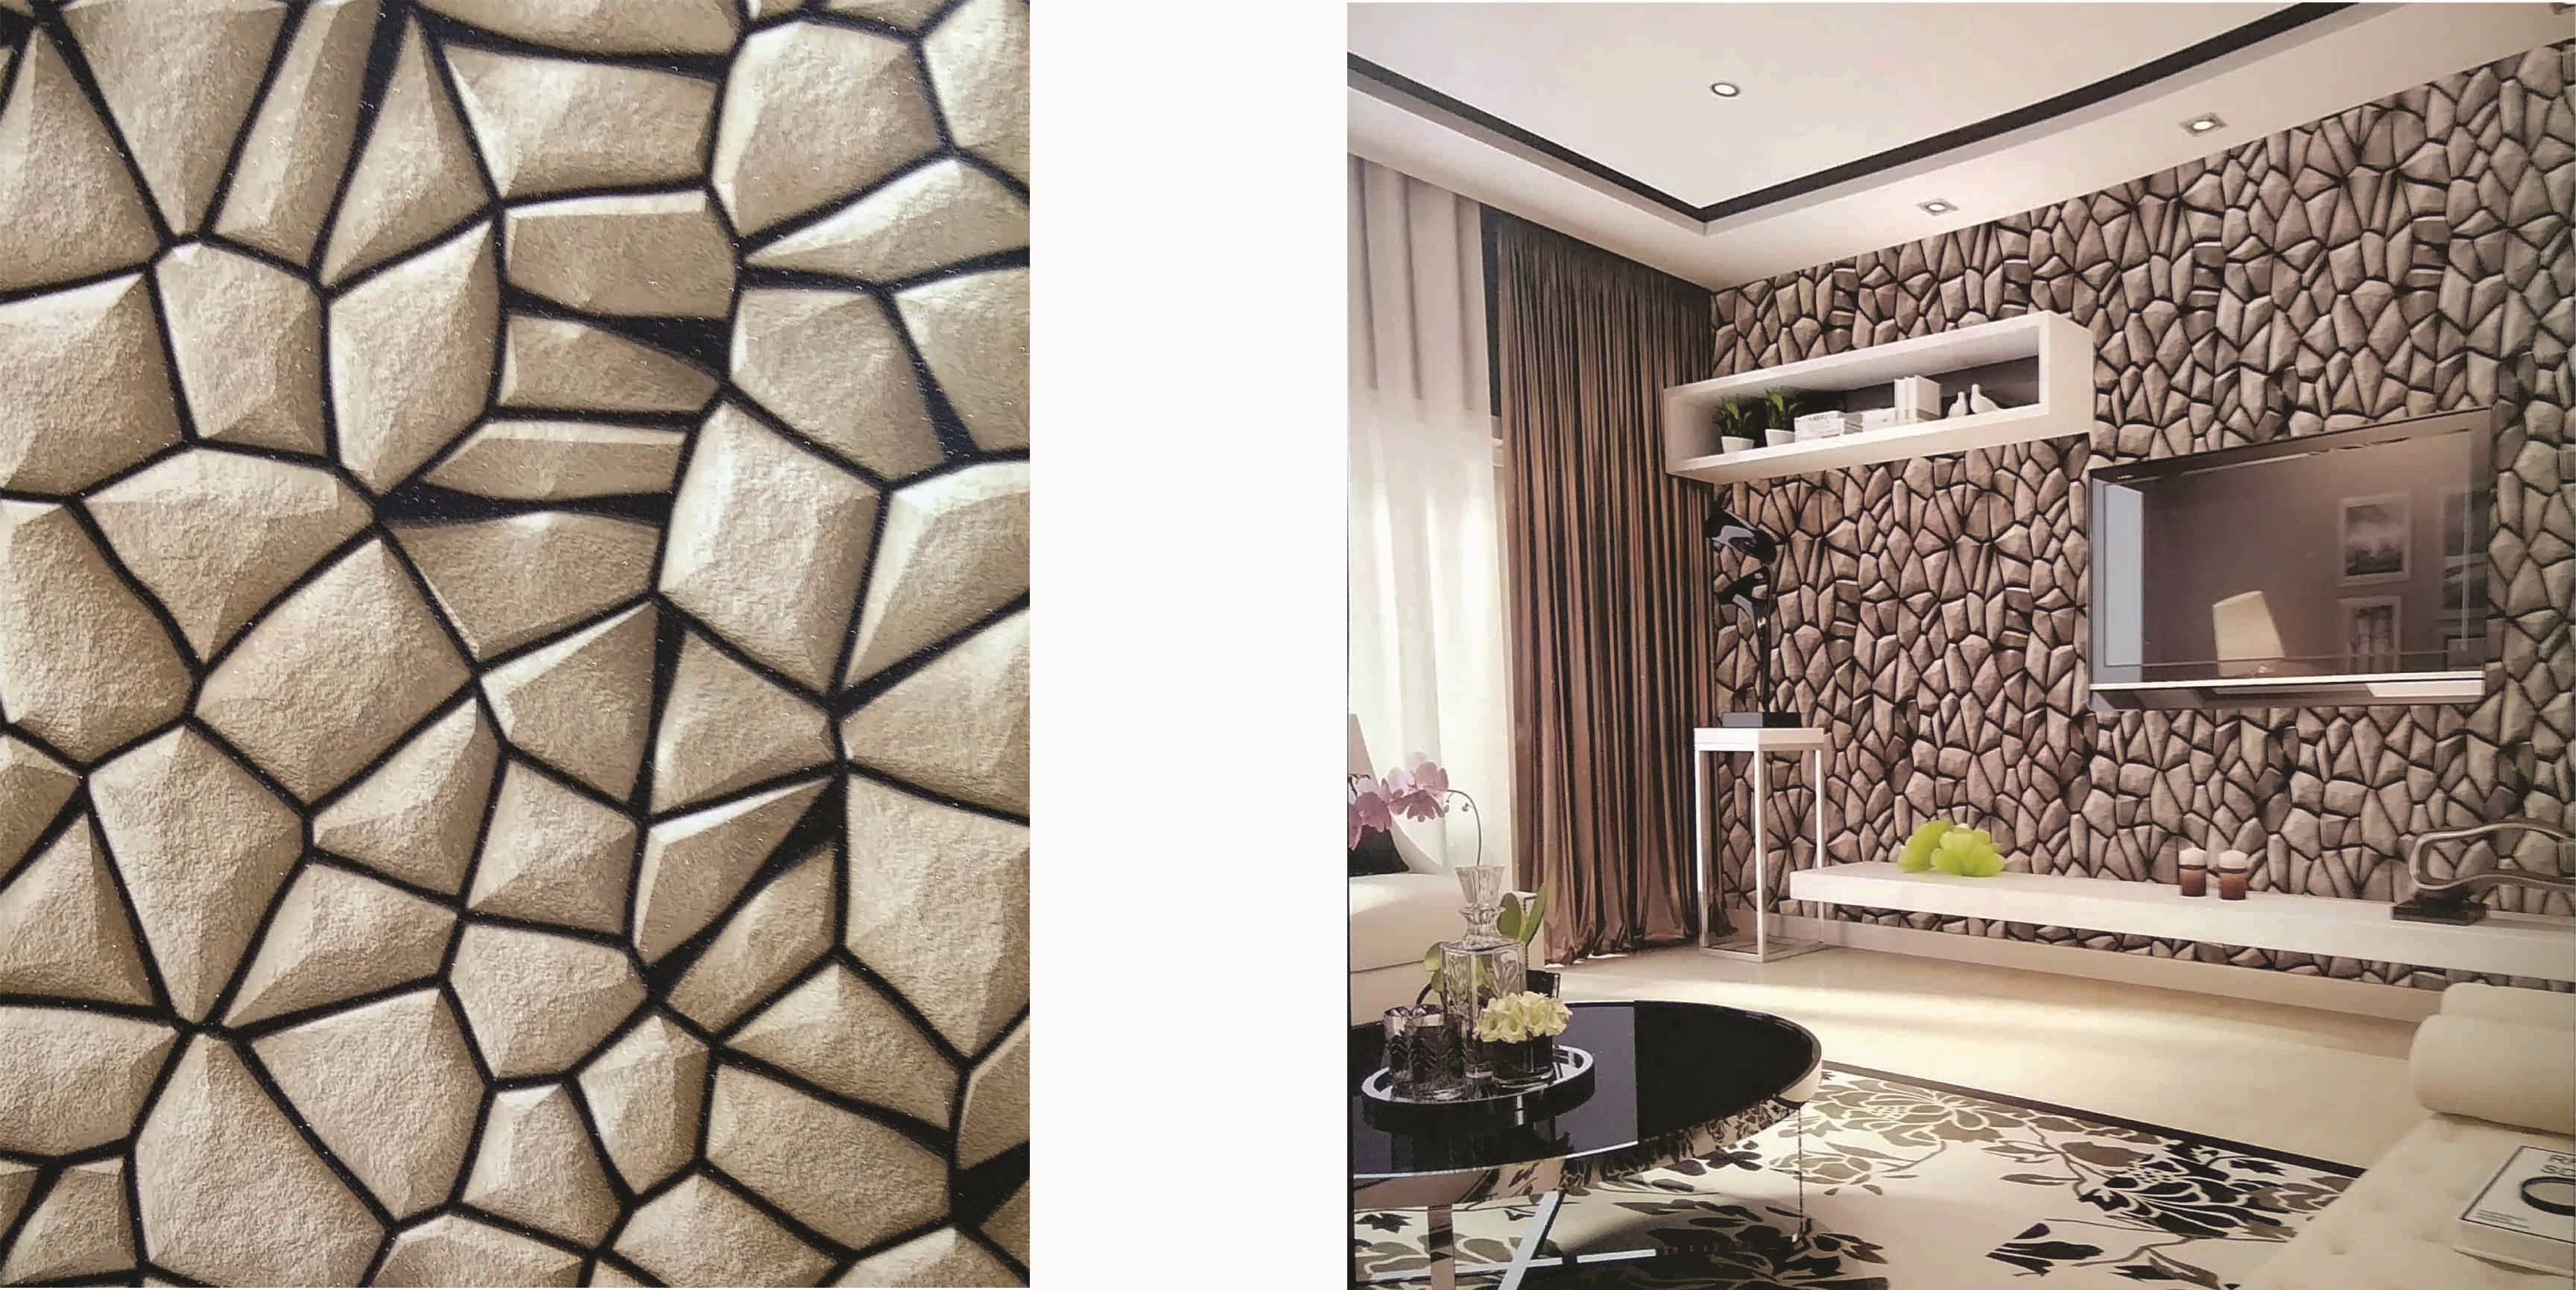 Modern 3D Wallpaper Design For Living Room Price In India with Epic Design ideas